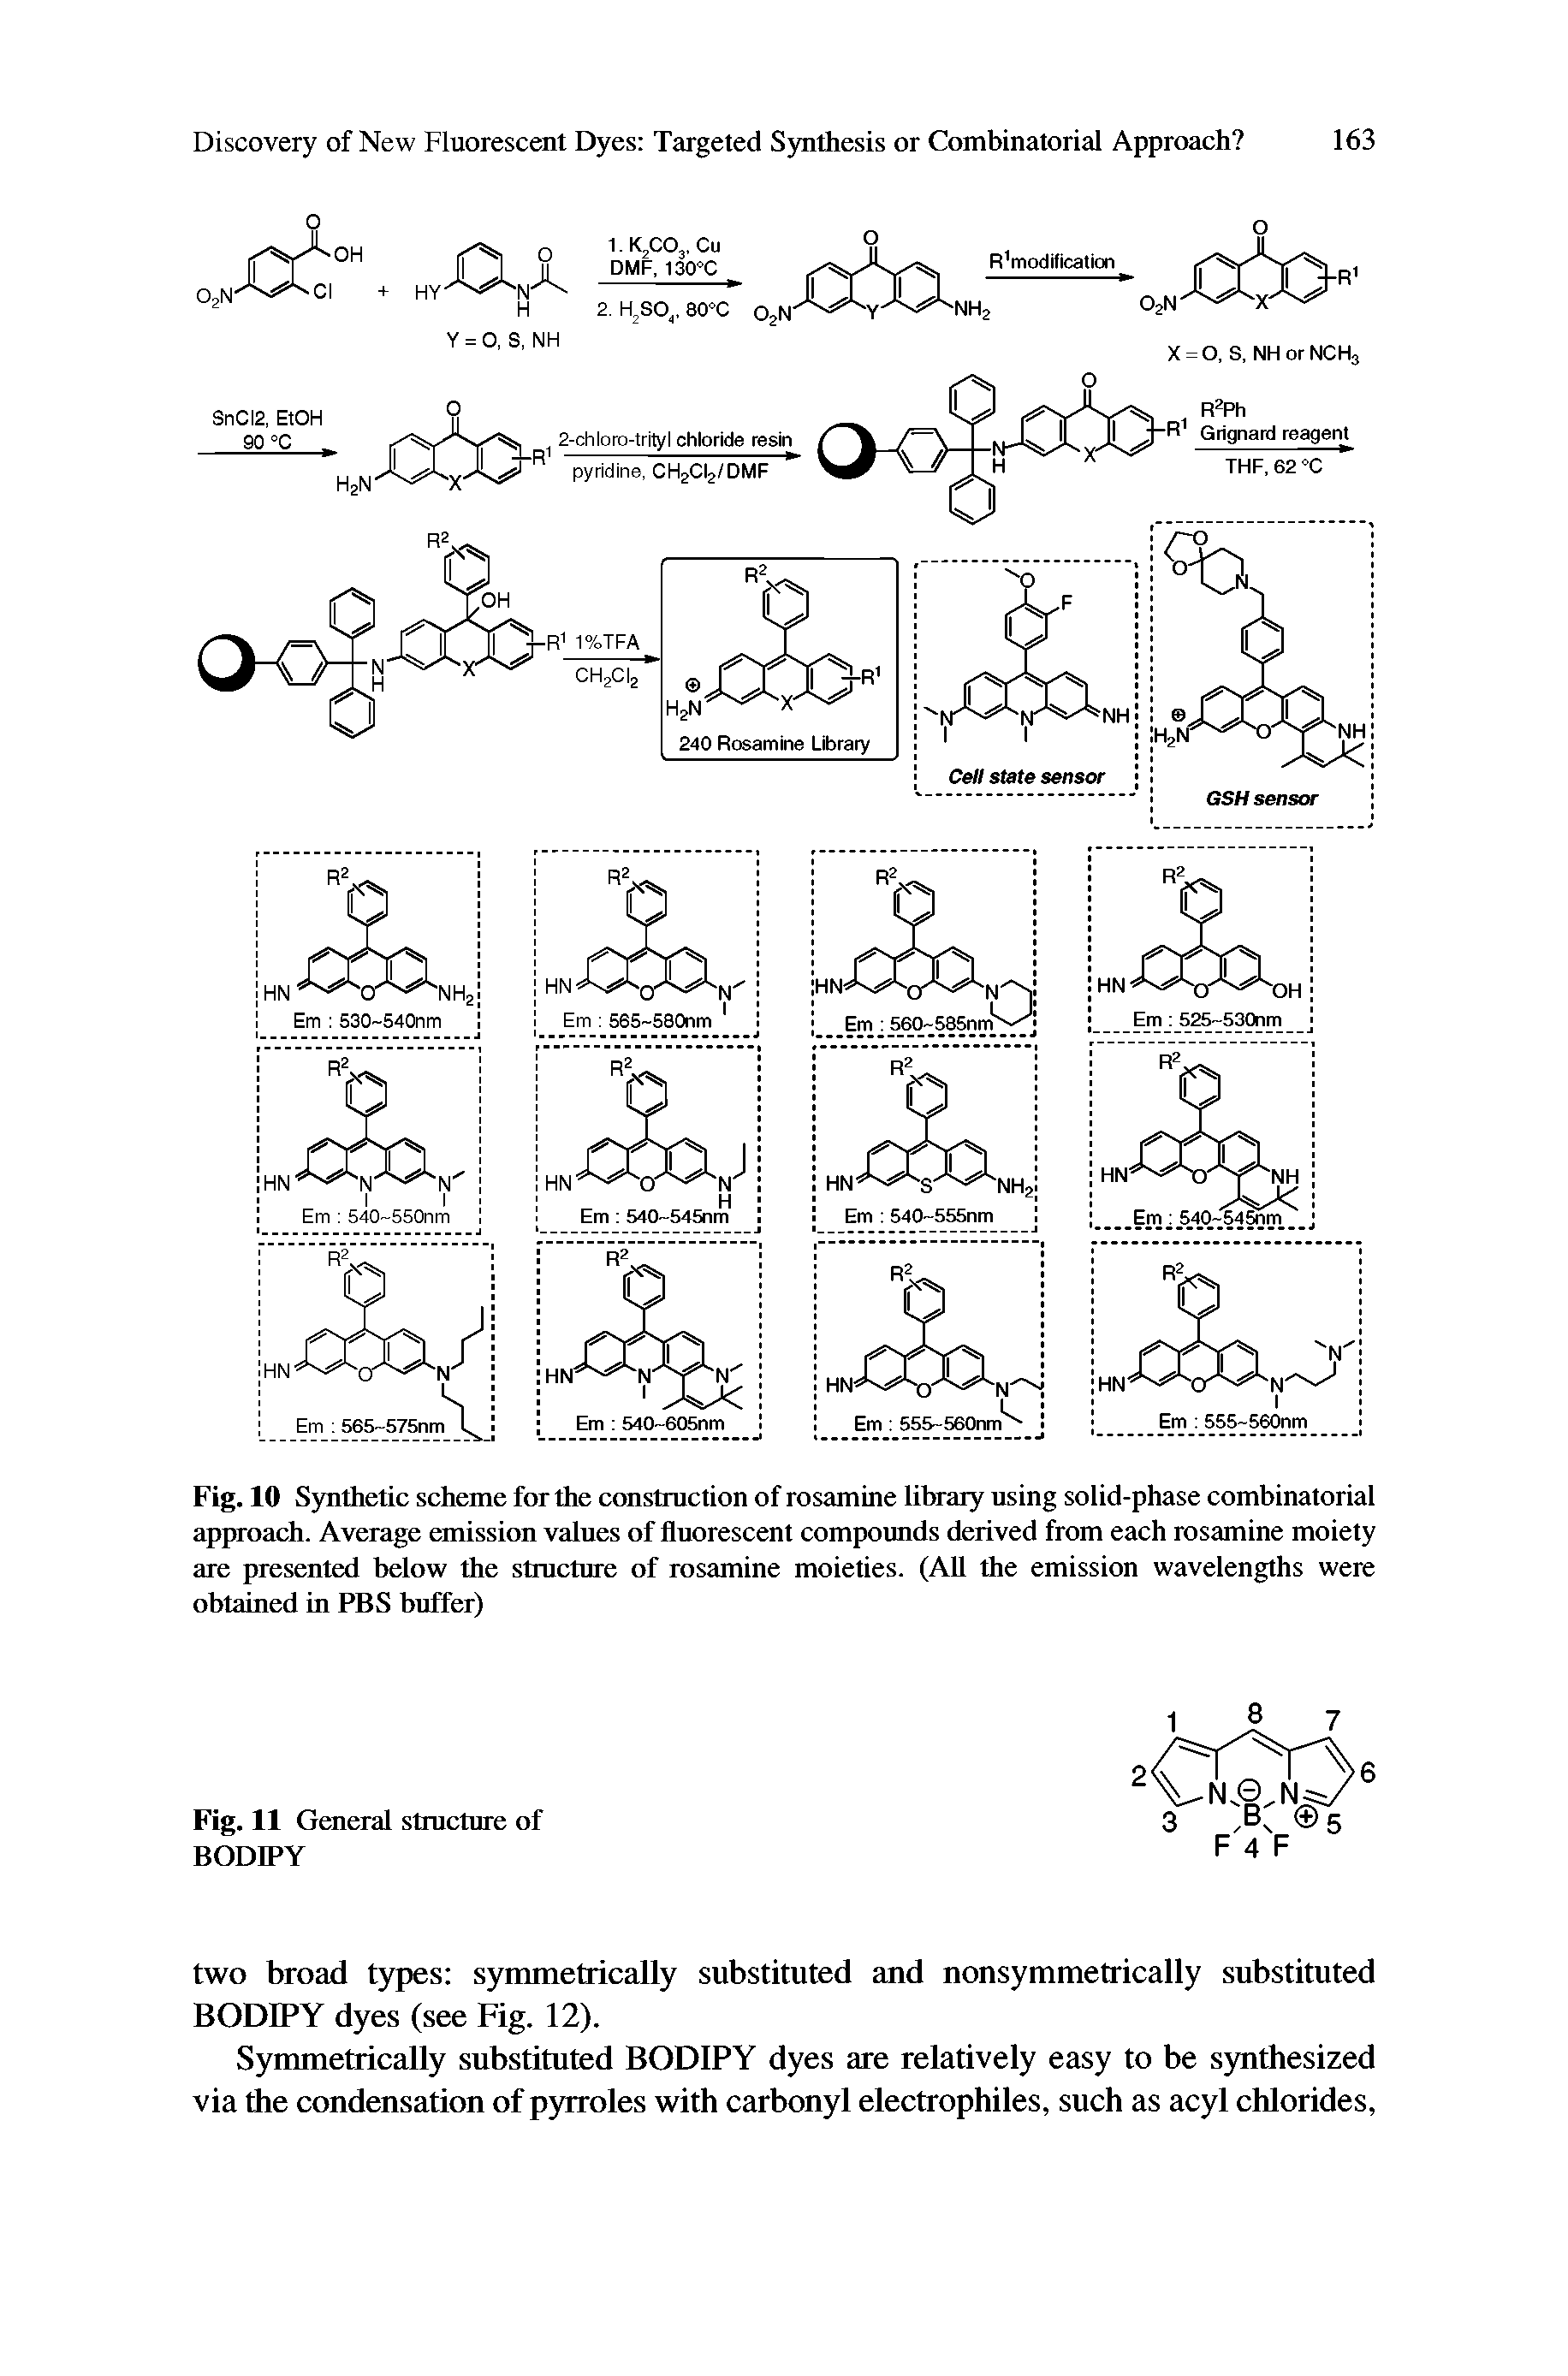 Fig. 10 Synthetic scheme for the construction of rosamine library using solid-phase combinatorial approach. Average emission values of fluorescent compounds derived from each rosamine moiety are presented below the structure of rosamine moieties. (All the emission wavelengths were obtained in PBS buffer)...